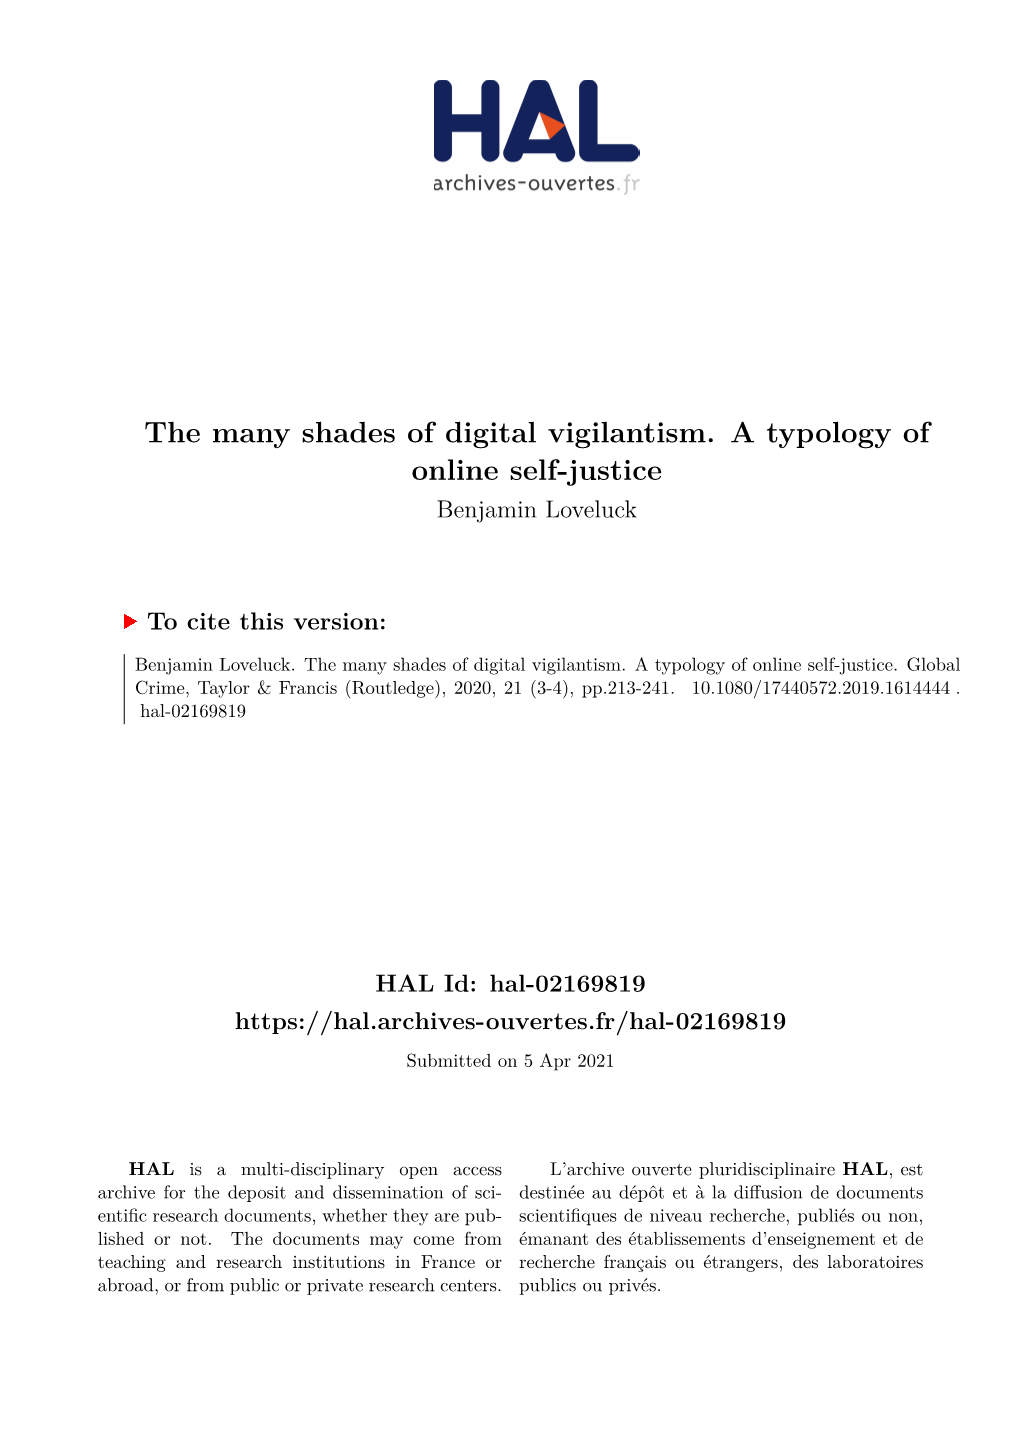 The Many Shades of Digital Vigilantism. a Typology of Online Self-Justice Benjamin Loveluck